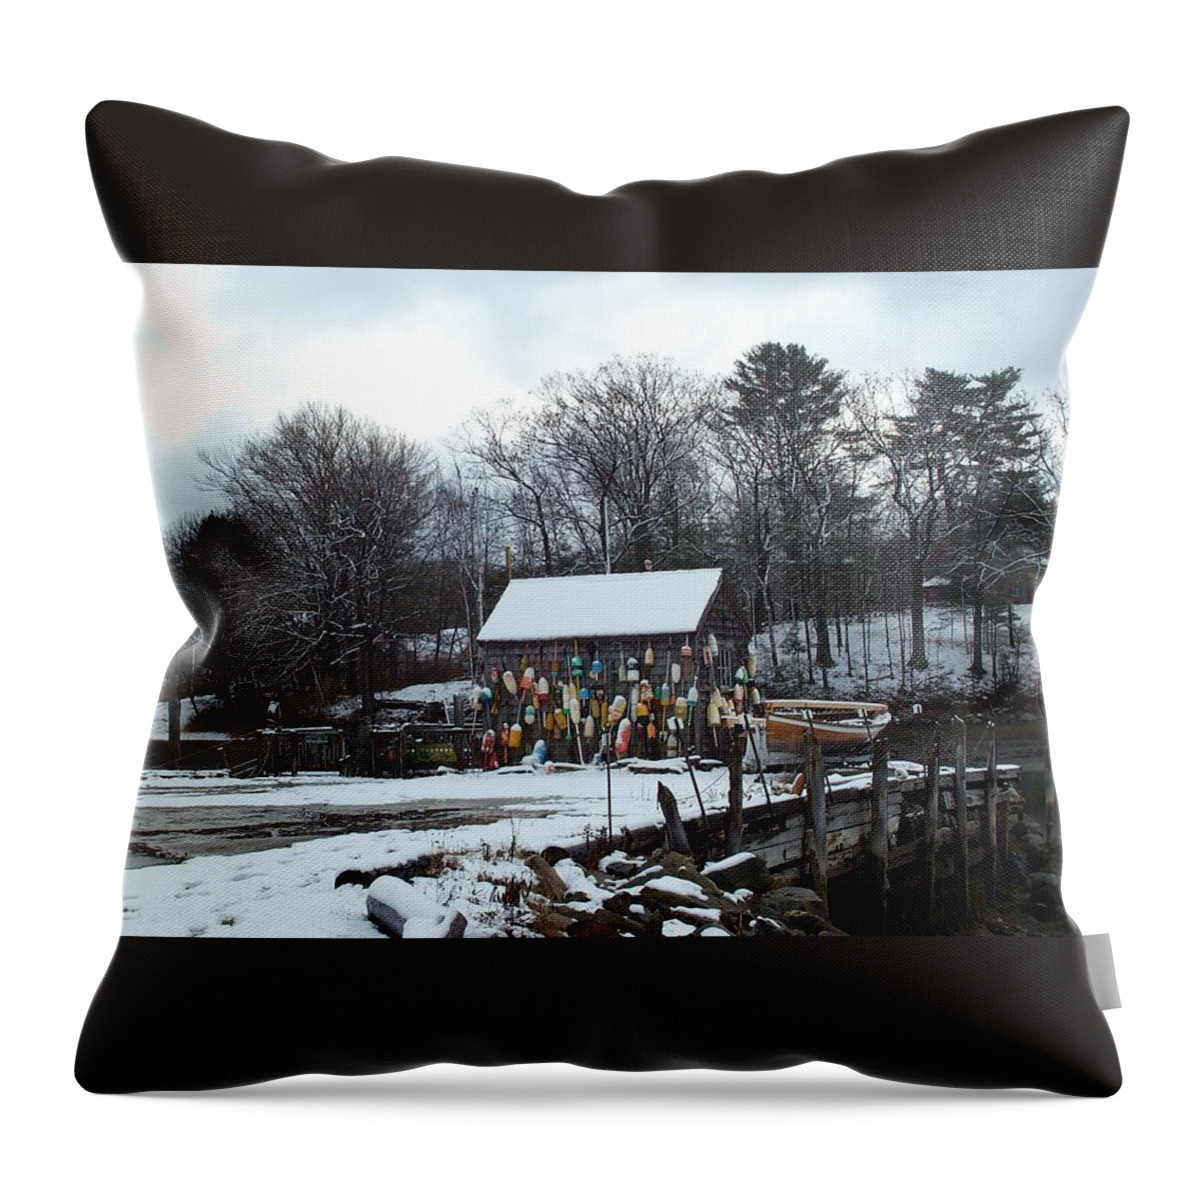 john Hancock Shack Throw Pillow featuring the photograph Waiting for lobster by Barbara McDevitt